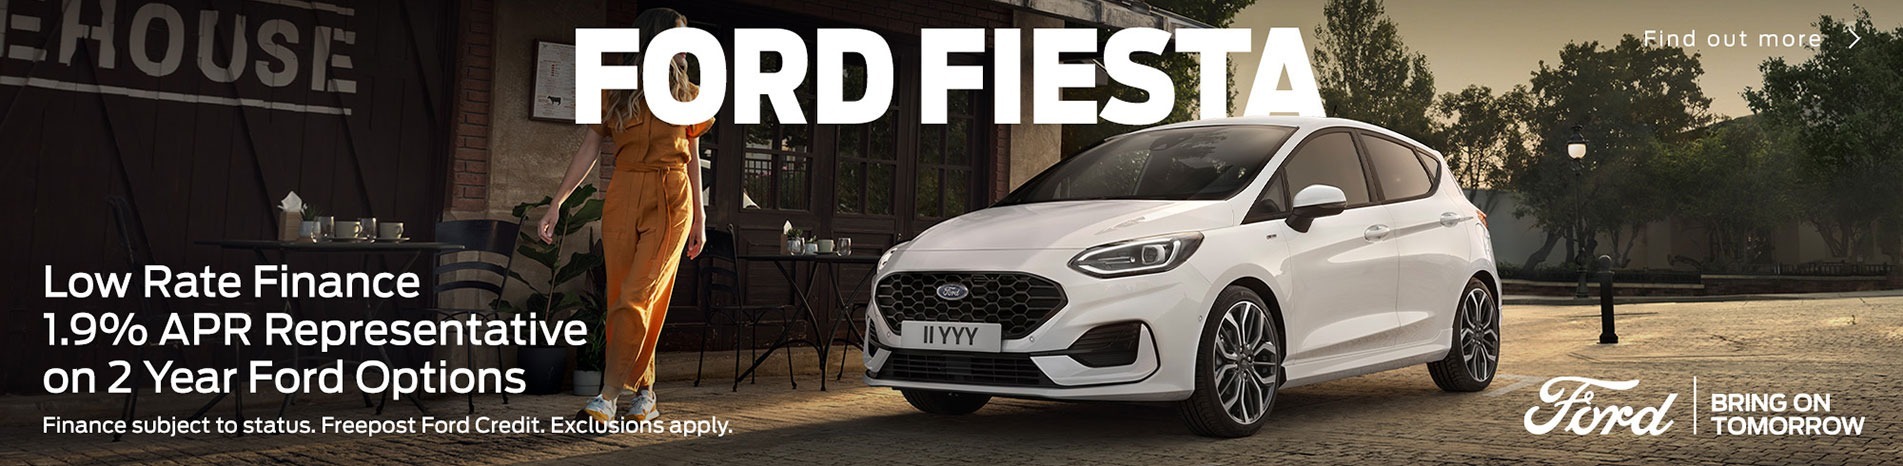 FORD FIESTA WITH 1.9% APR ON 2 YEAR FORD OPTIONS